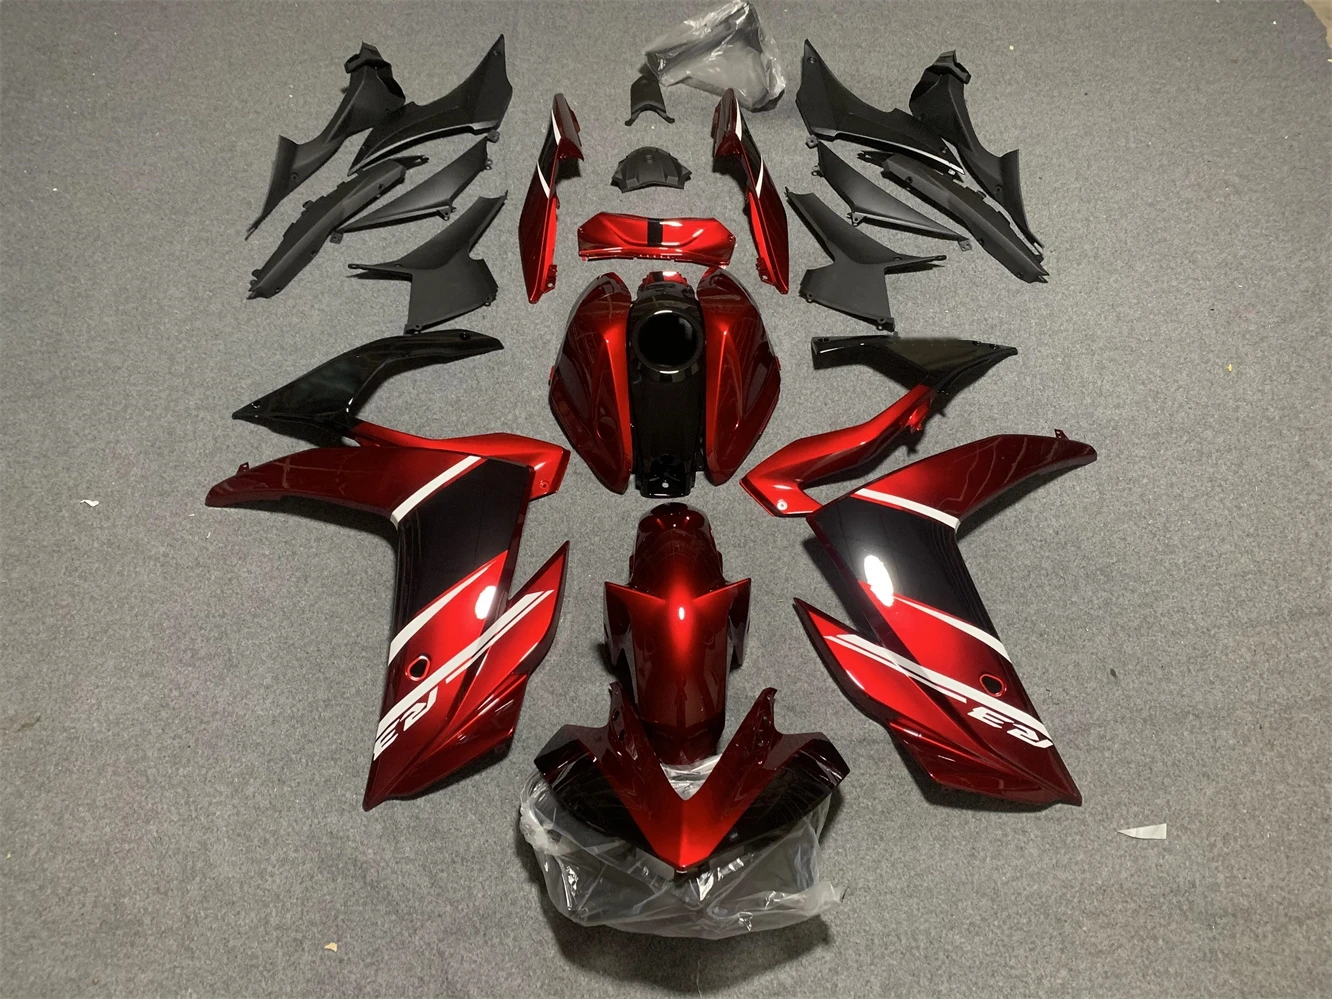 Motorcycle Fairing Kit Suitable for Yamaha R25 15-18 Years R3 2015 2016 2017 2018 Fairing White wine red Black